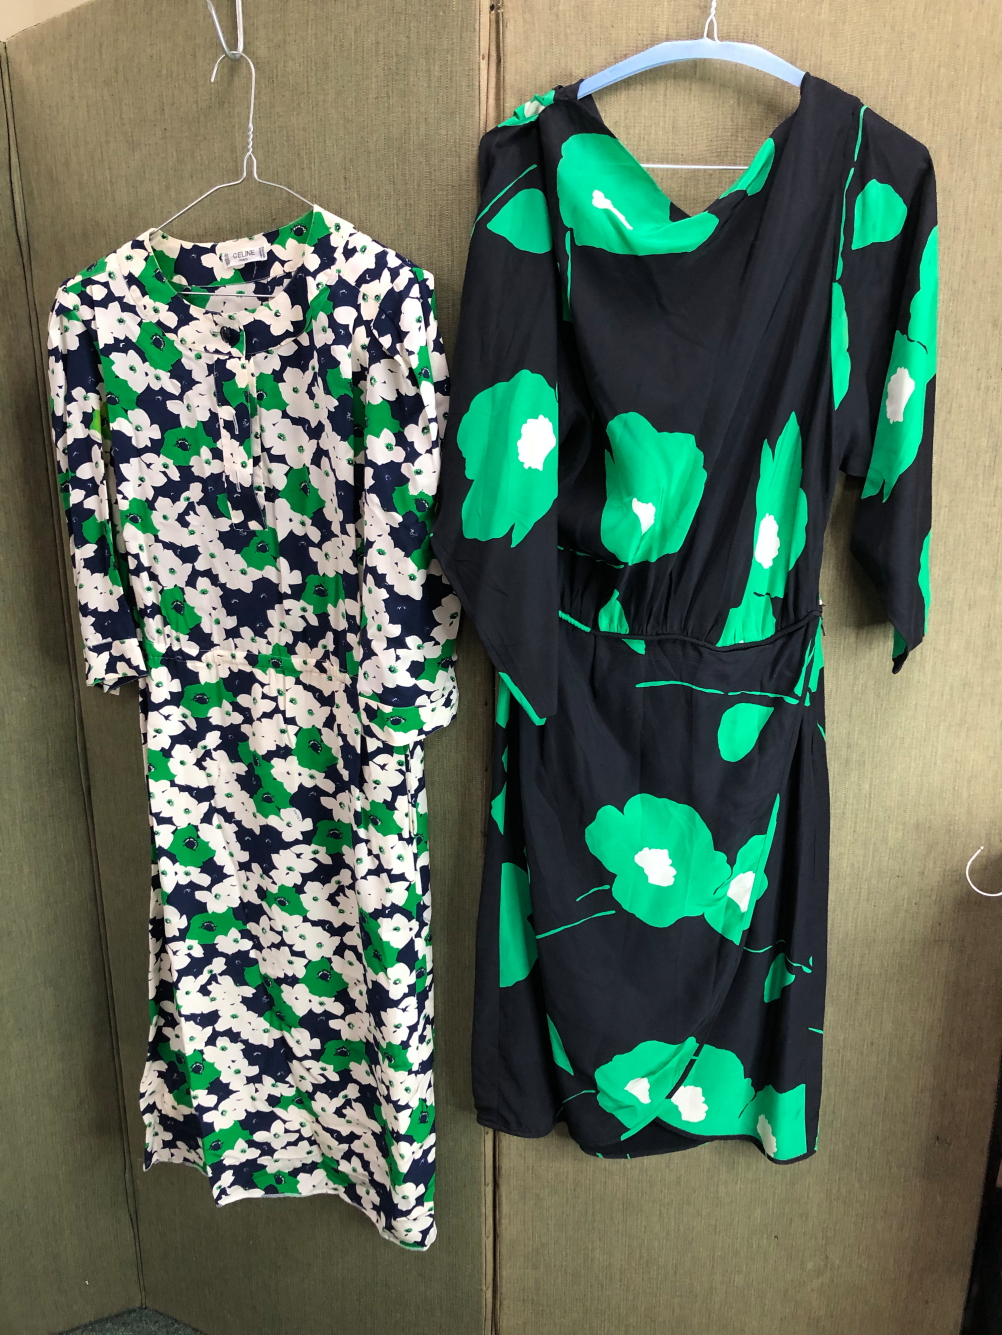 A CELINE PARIS BLUE, WHITE AND GREEN FLORAL PRINT DRESS SIZE 40, AND A FURTHER SCOOP BACK DRESS OF